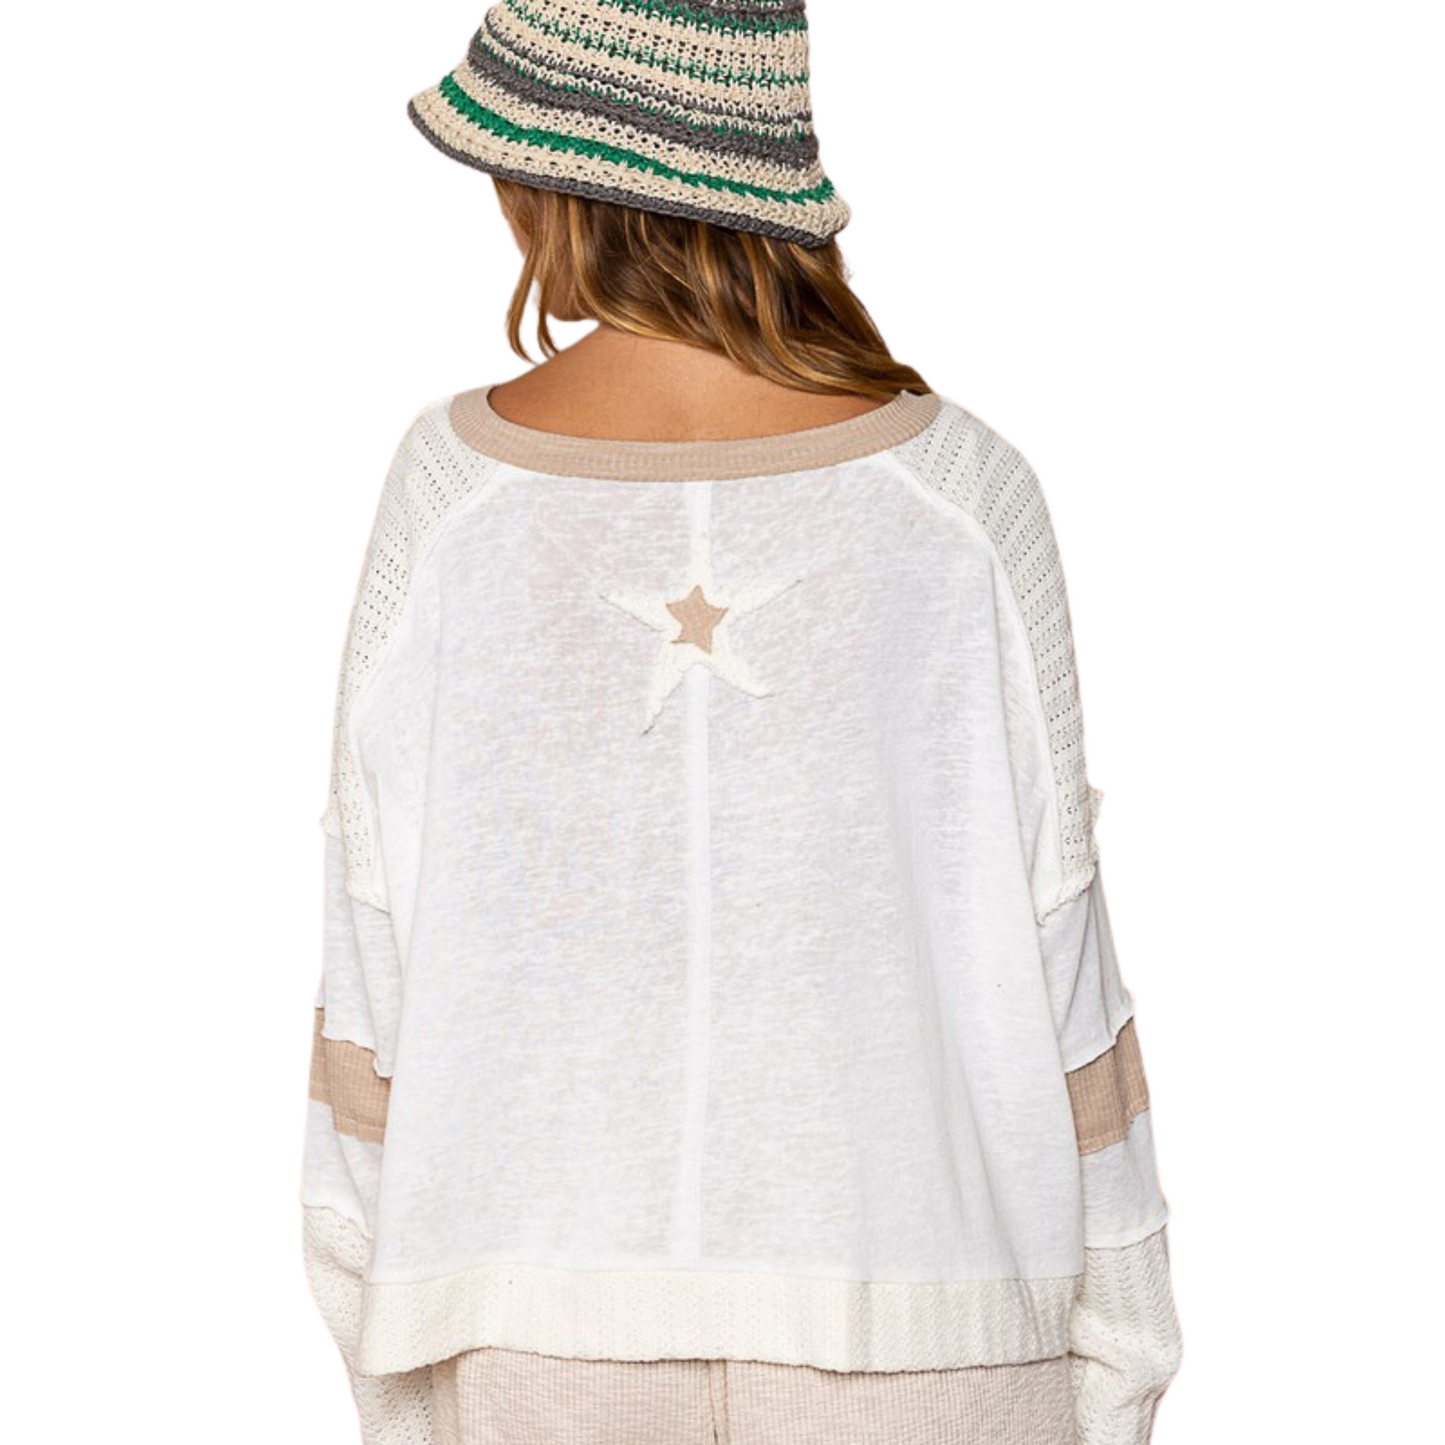 This Star Patch Cropped Knit Top is perfect for any casual occasion. Expertly designed with a round-neckline oversized fit and a cropped body length with long sleeves, this knit top is made from 100% cotton for comfort. The star shape patch-work adds a stylish touch, while the ivory color makes for a timeless look.